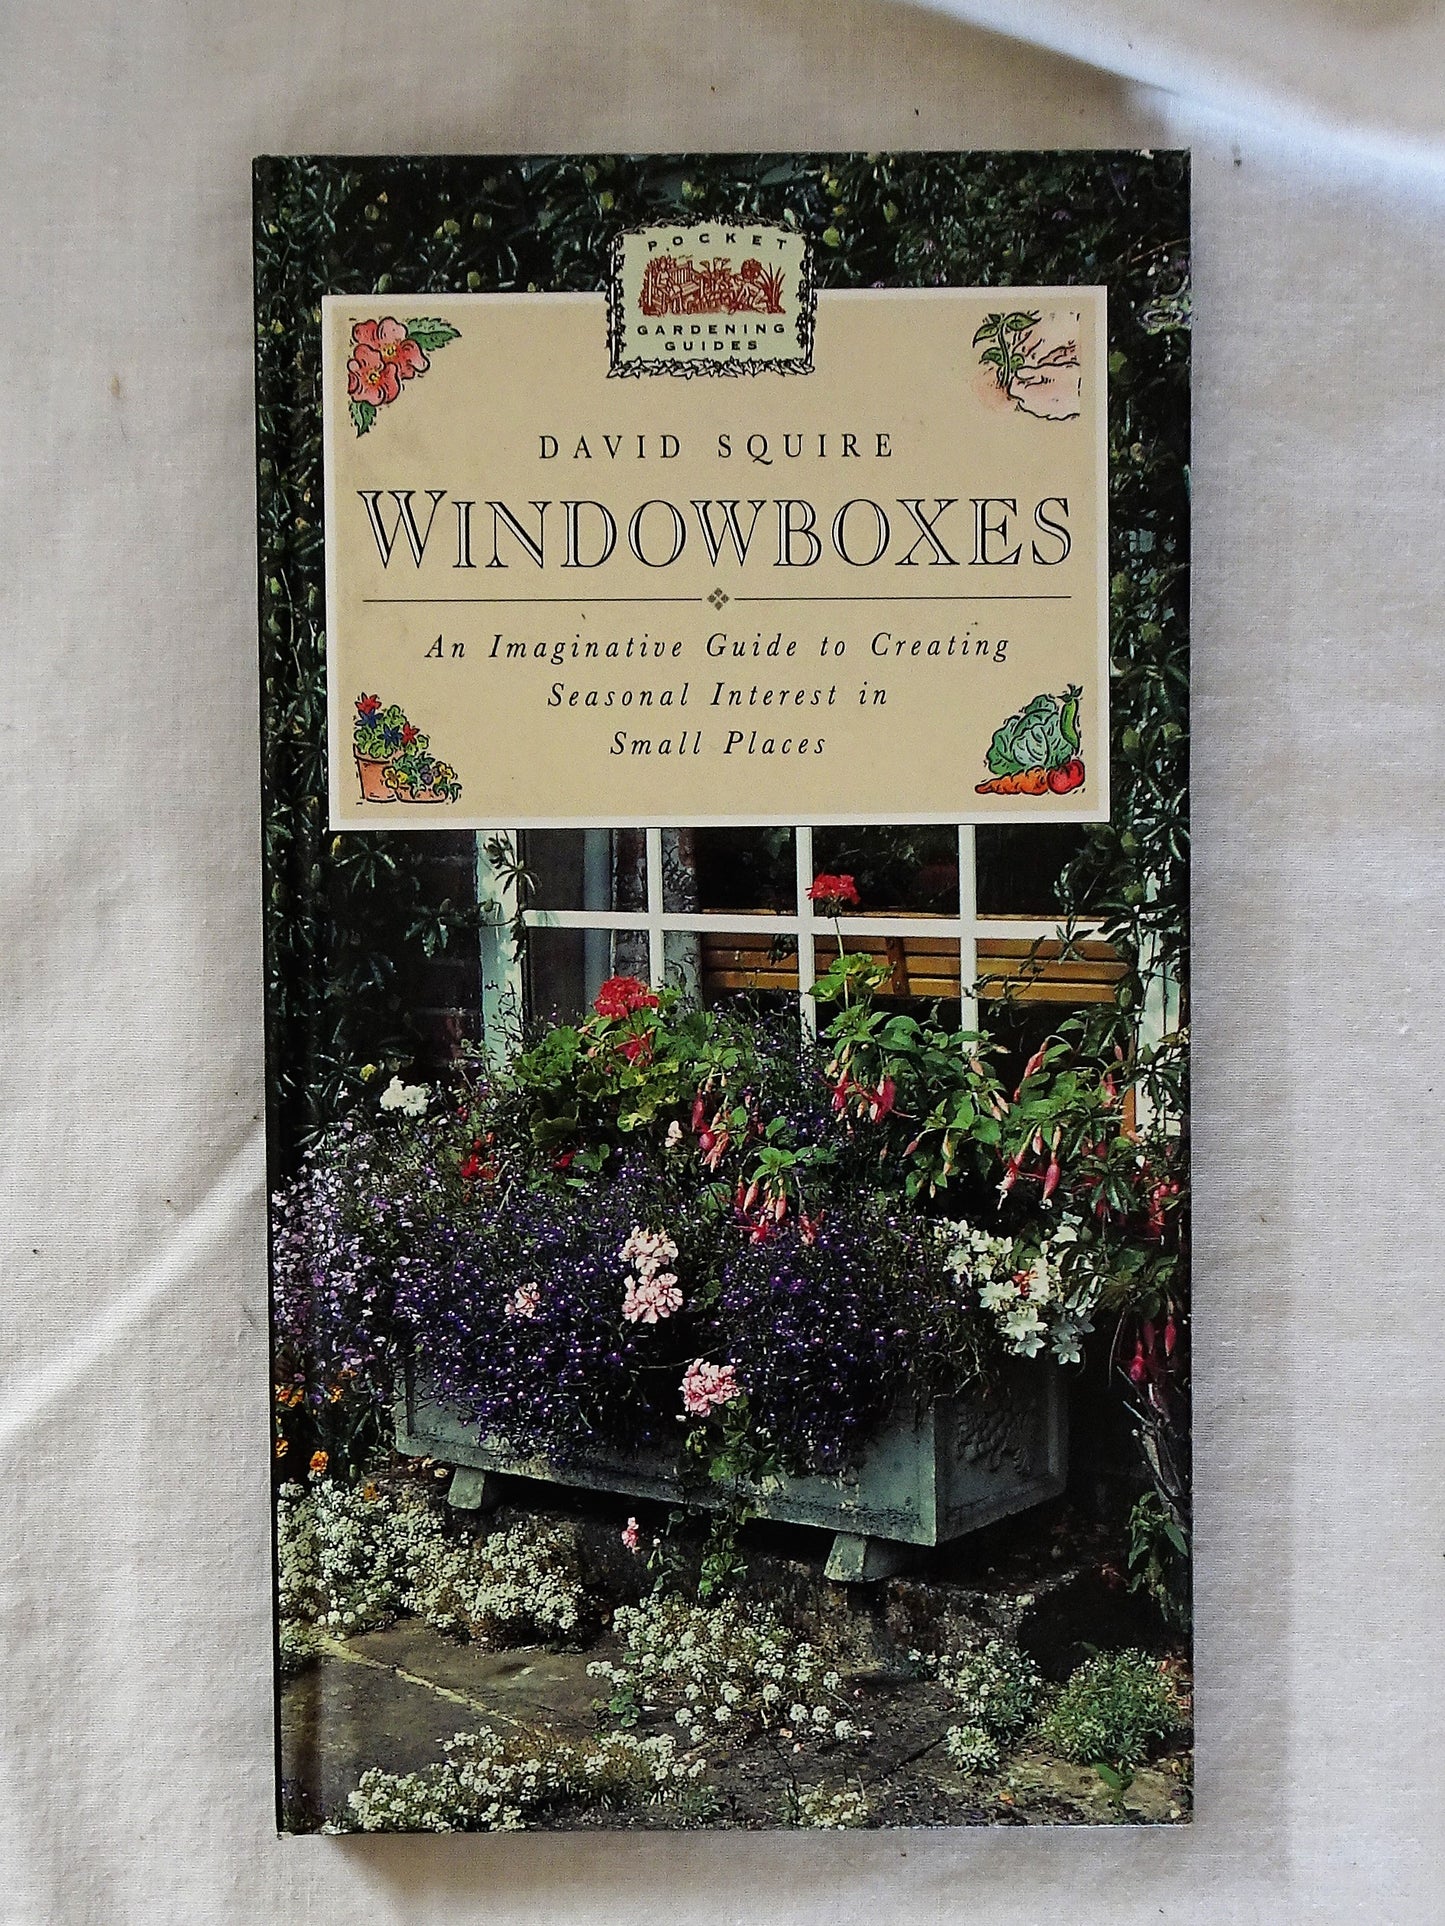 Windowboxes  An Imaginative Guide to Creating Seasonal Interest in Small Places  by David Squire